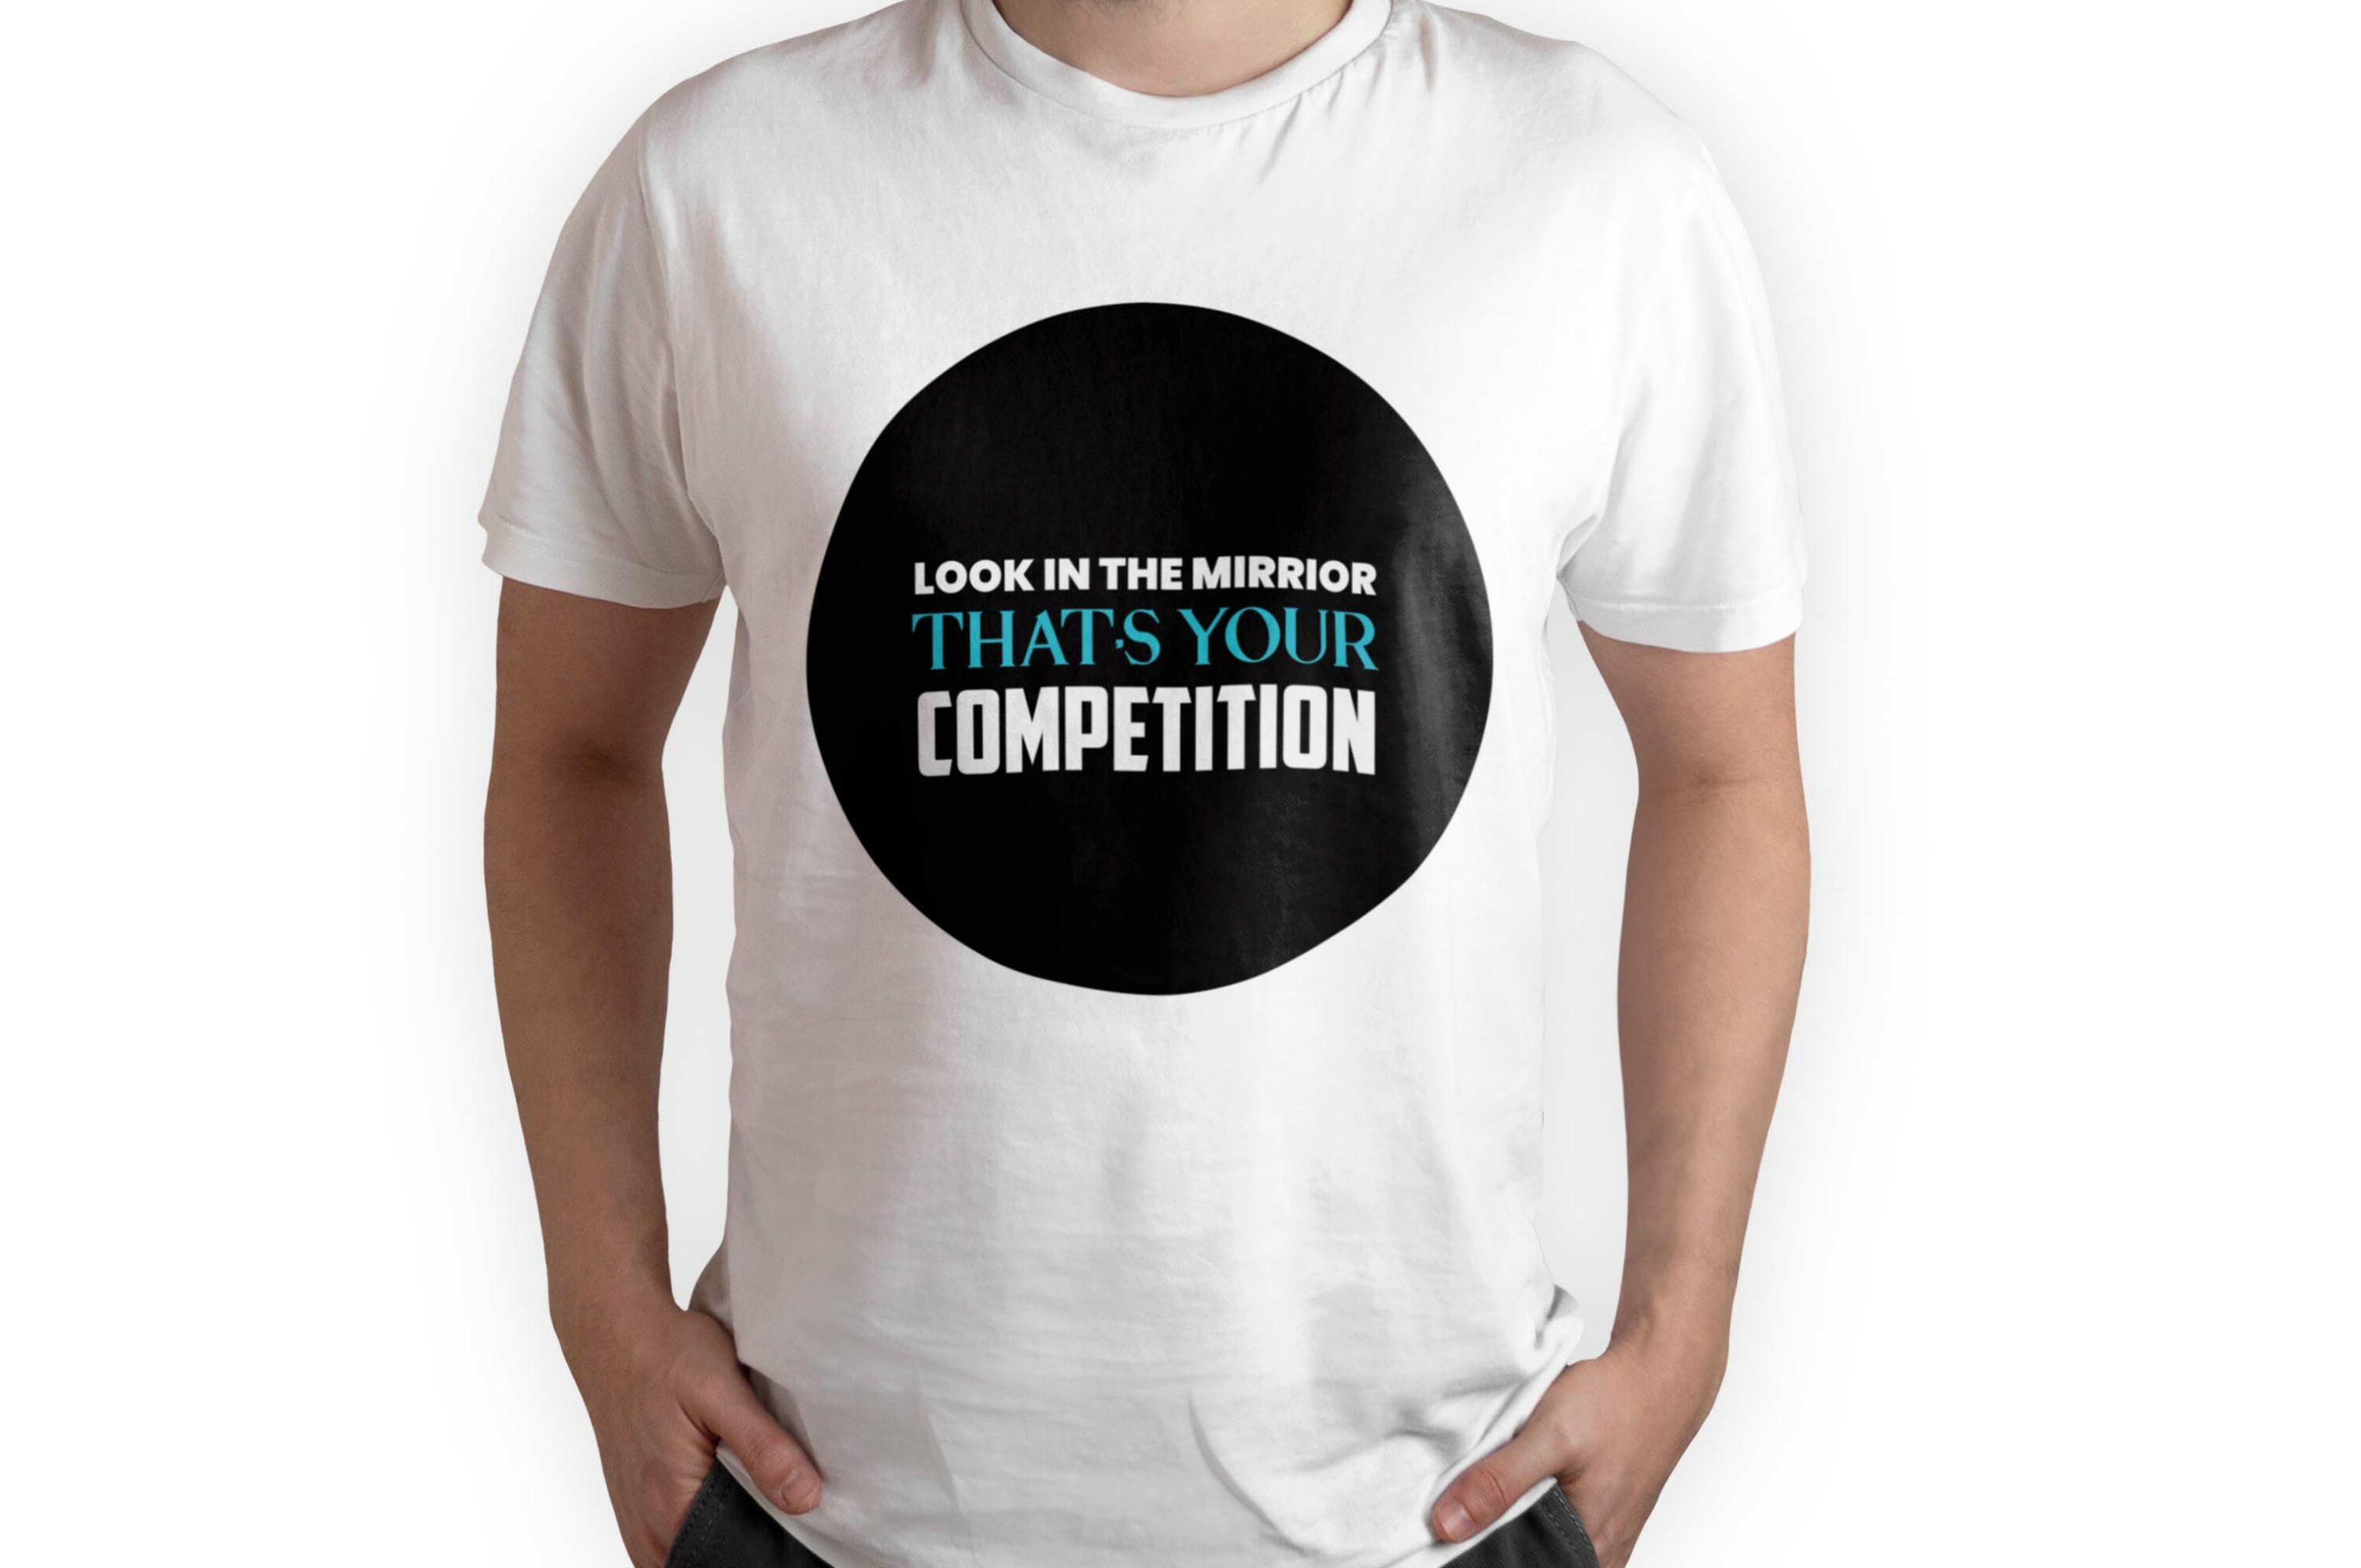 Bundle of 156 T-shirt Designs with Fitness Quotes, look in the mirror.